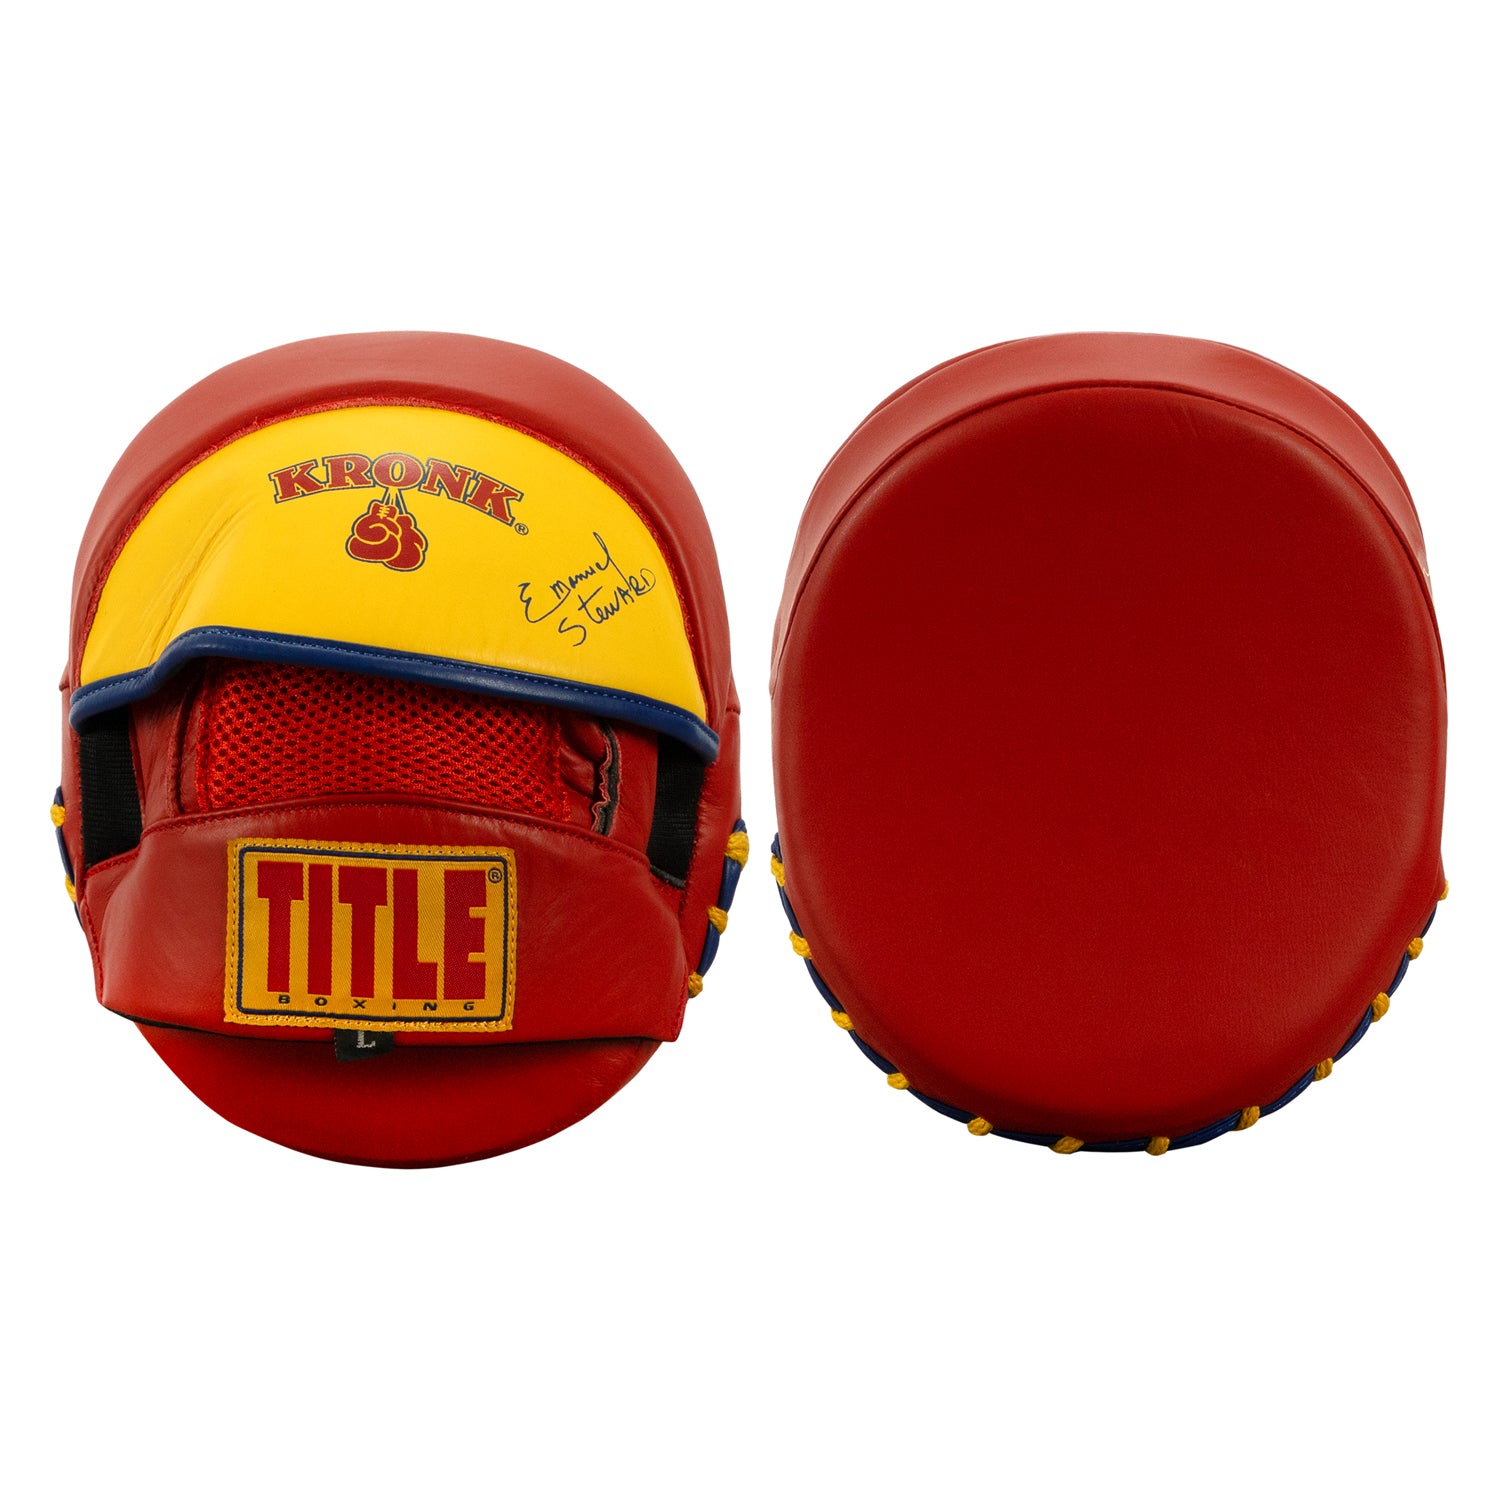 Emanuel Steward’s KRONK Boxing Leather Punch Mitts